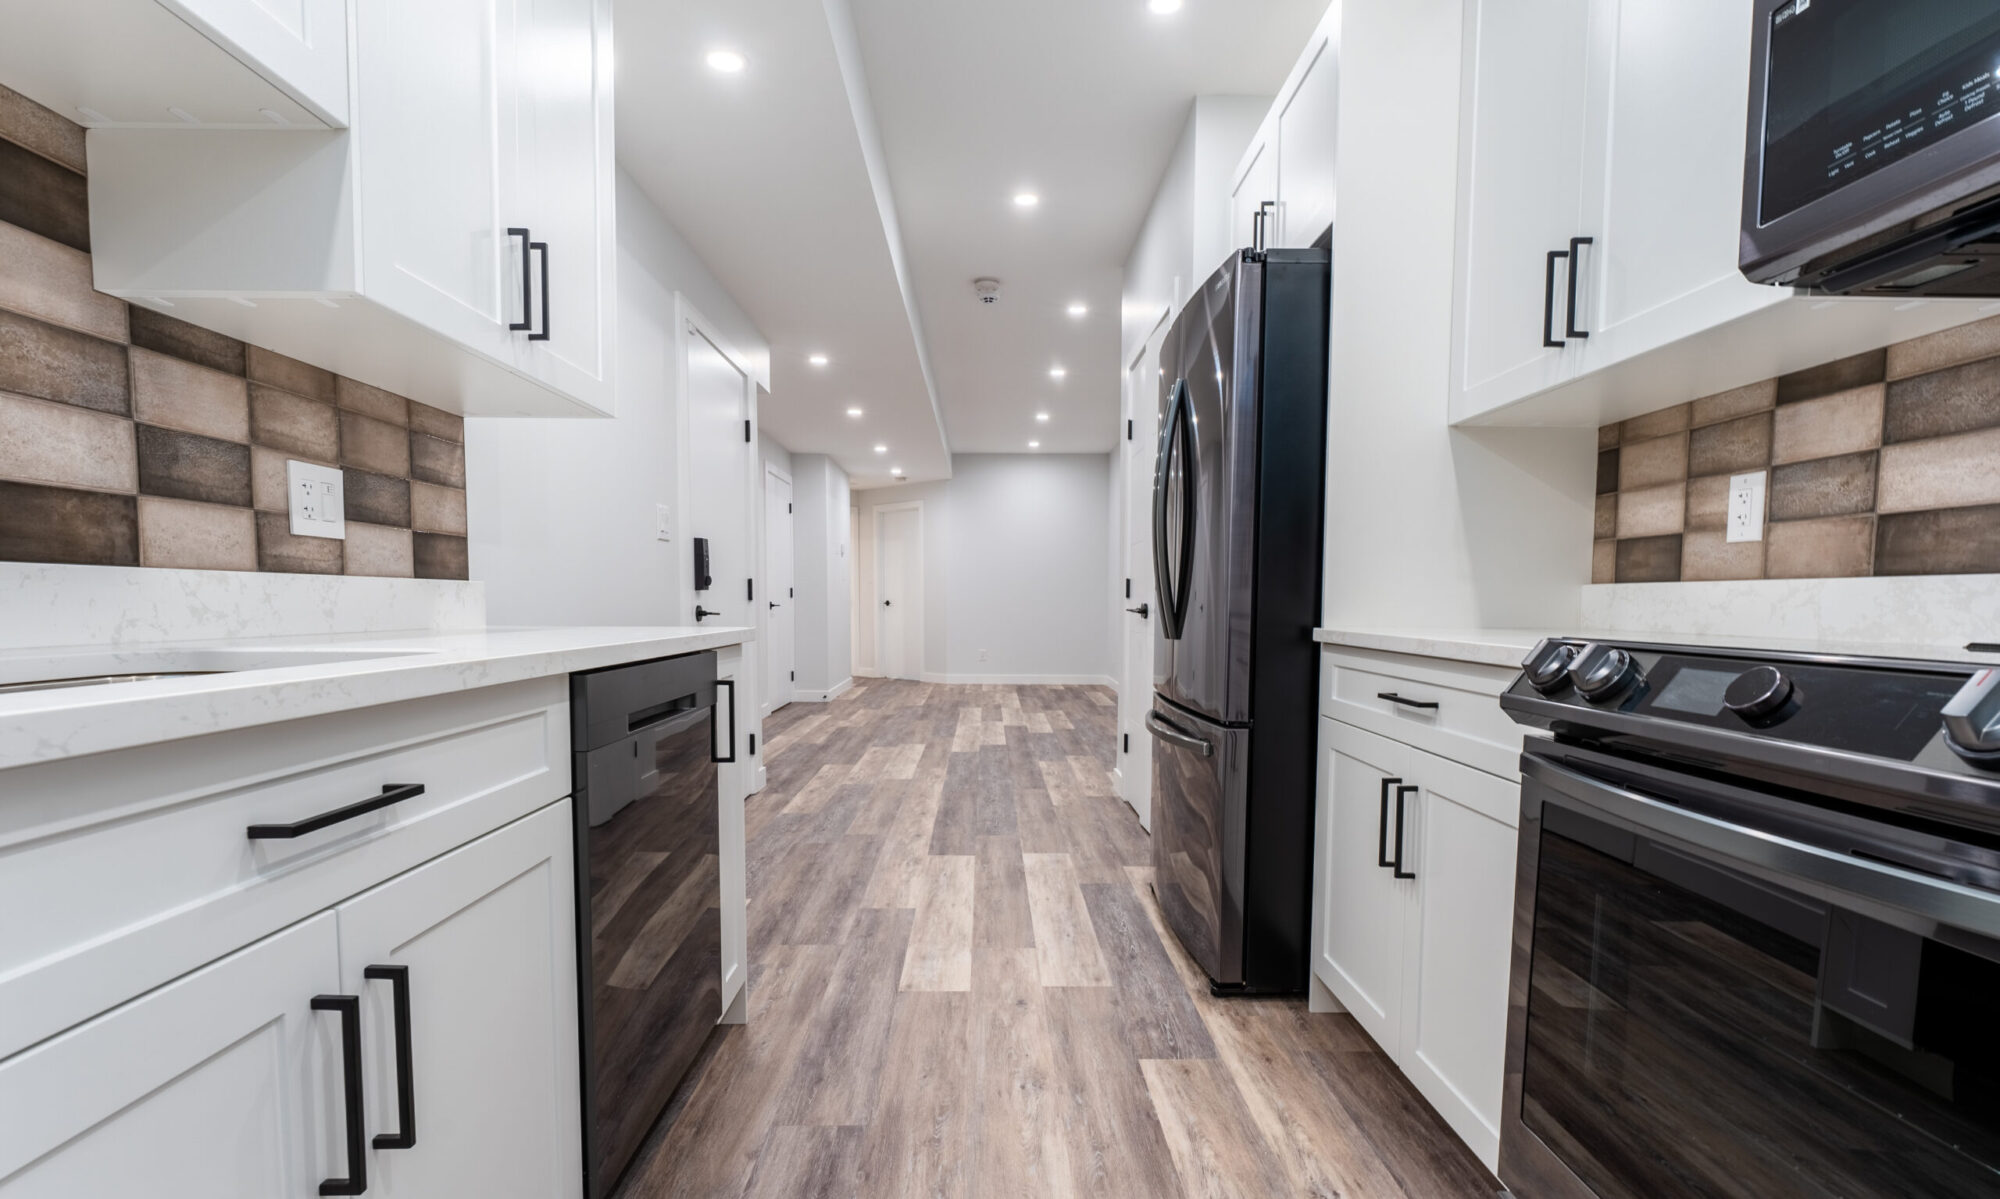 A modern kitchen interior featuring white cabinetry, striped backsplash tiles, and stainless-steel appliances. The floor is covered with wood-like tiles extending into a well-lit hallway.